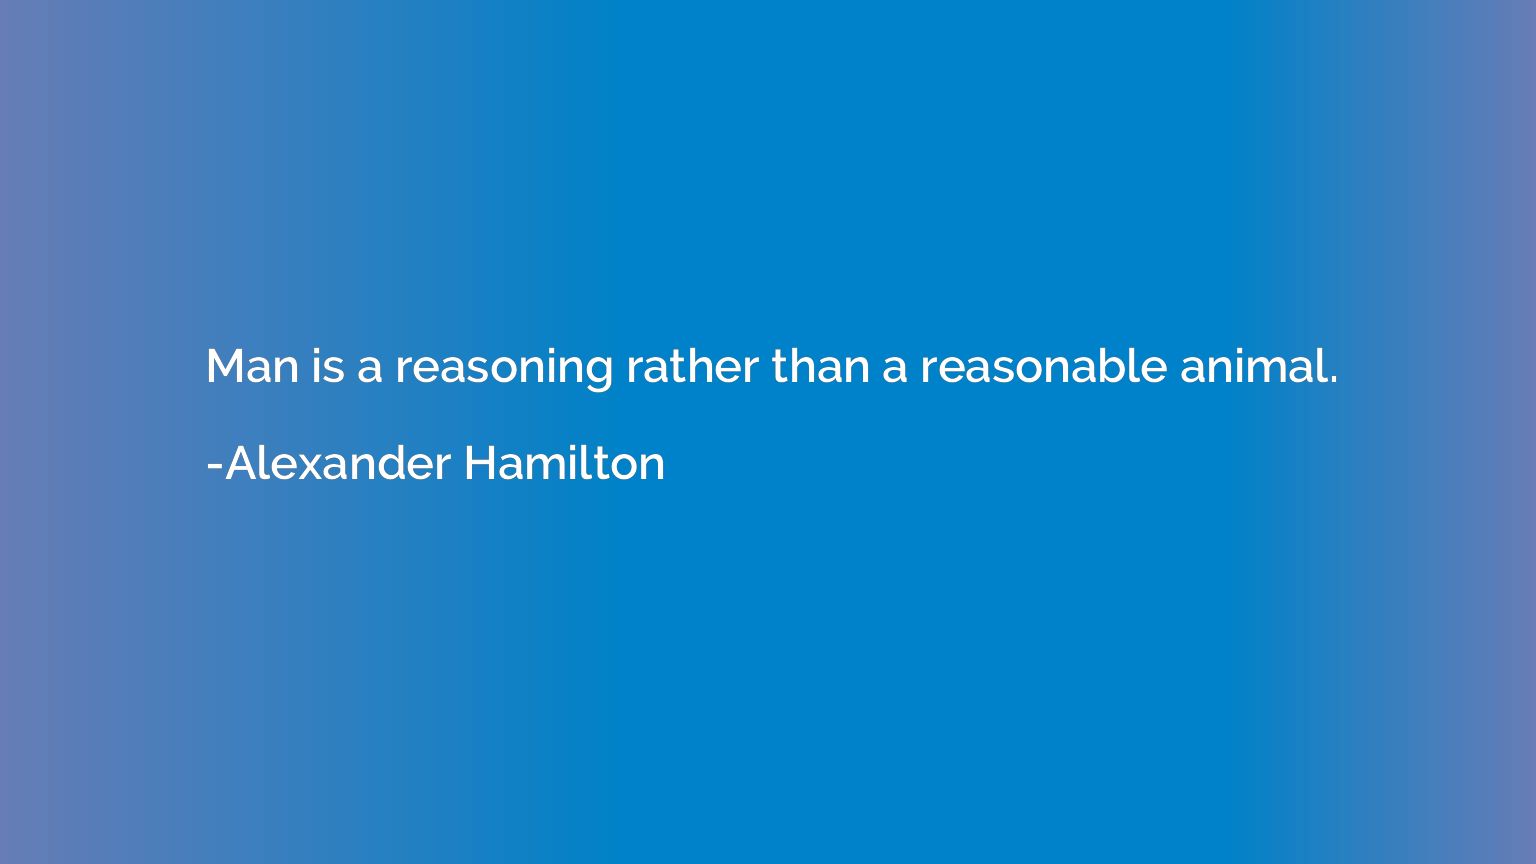 Man is a reasoning rather than a reasonable animal.